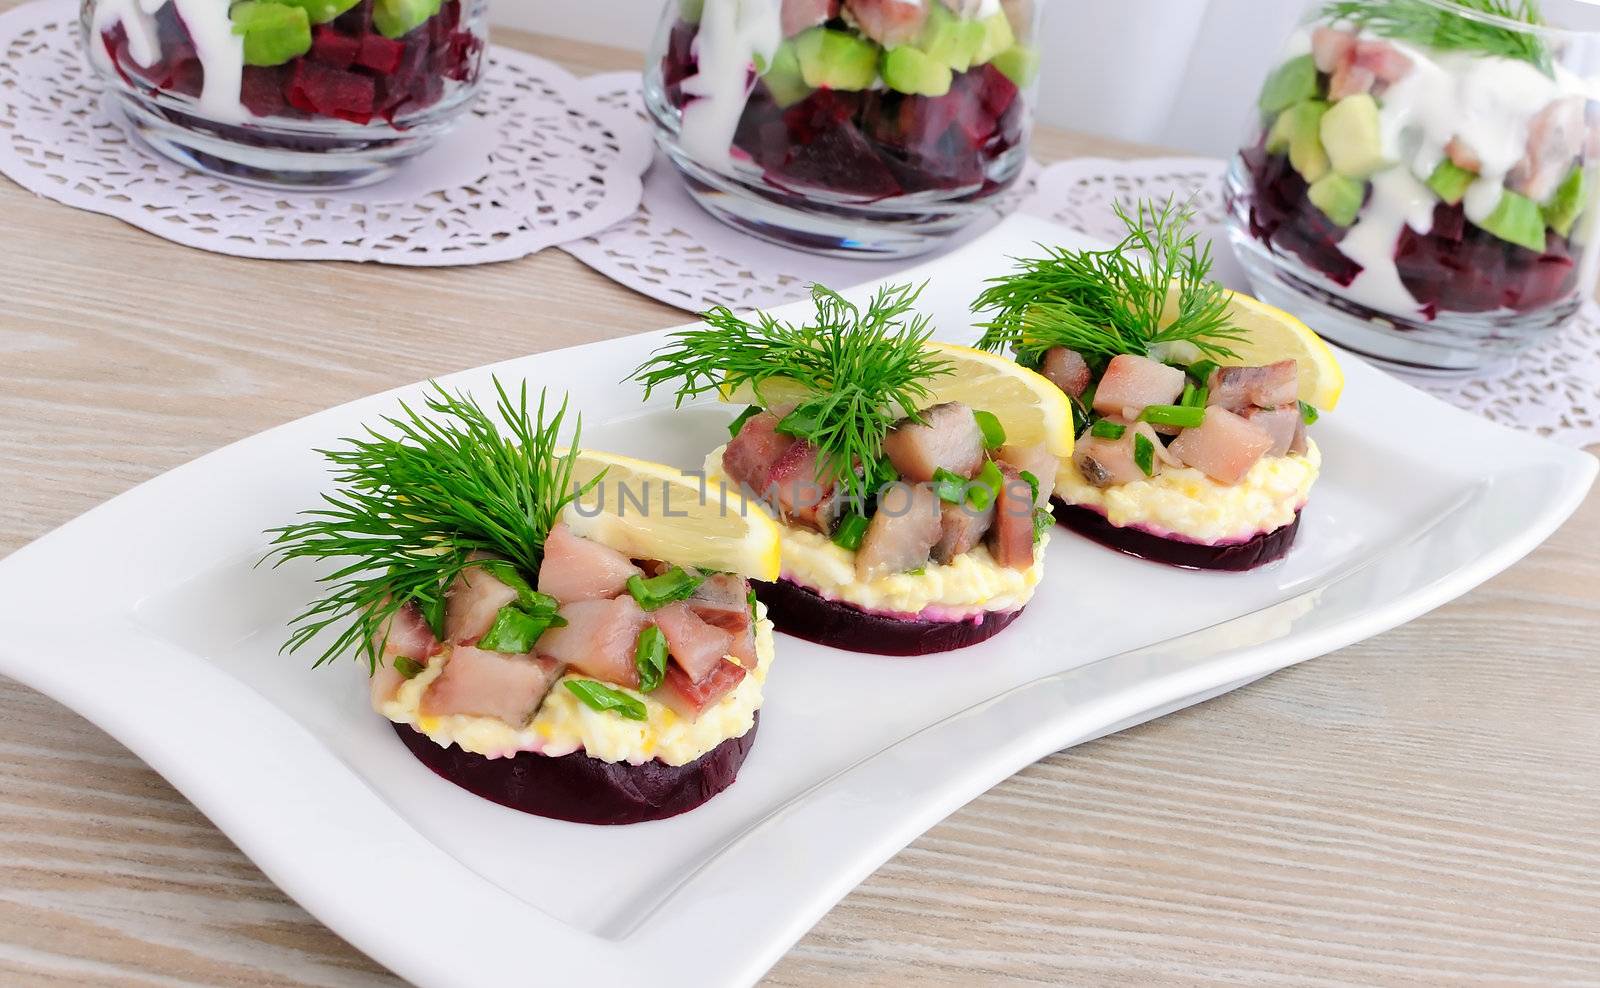 Appetizer of herring with onions on the beets and eggs, lemon and dill